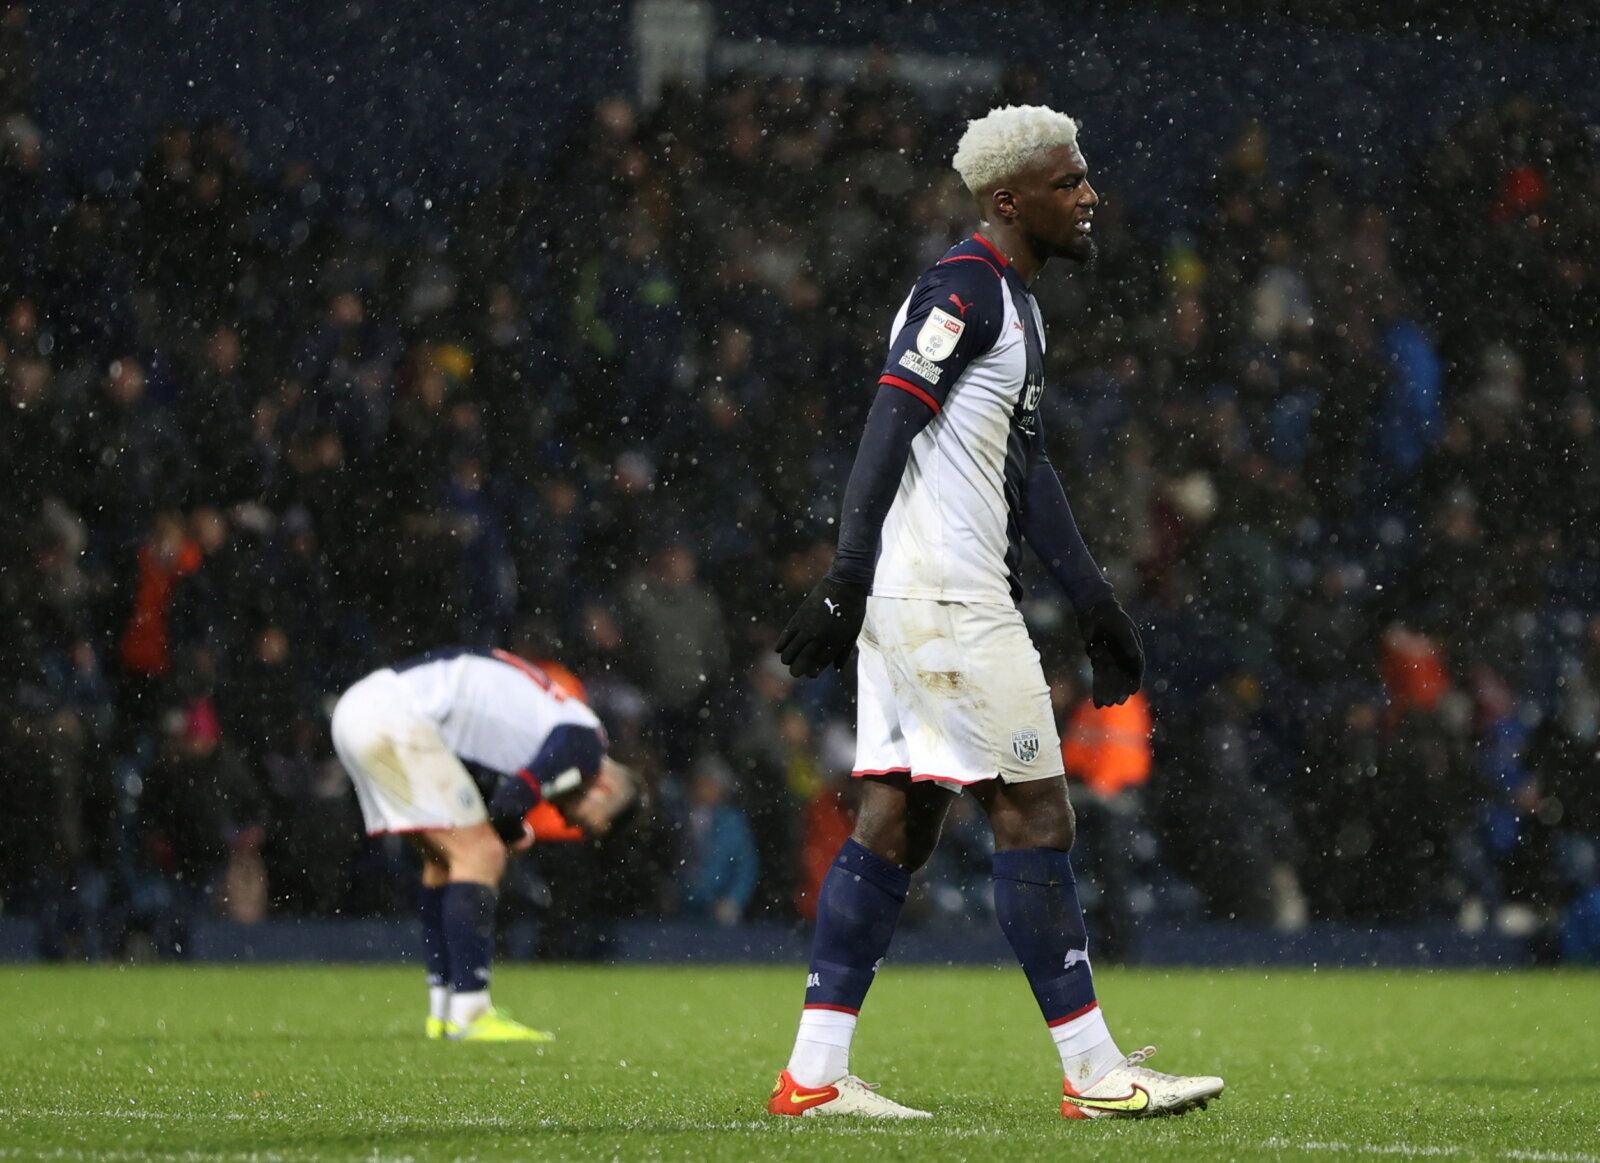 Soccer Football - Championship - West Bromwich Albion v Nottingham Forest - The Hawthorns, West Bromwich, Britain - November 26, 2021 West Bromwich Albion's Cedric Kipre after the match   Action Images/Molly Darlington  EDITORIAL USE ONLY. No use with unauthorized audio, video, data, fixture lists, club/league logos or 